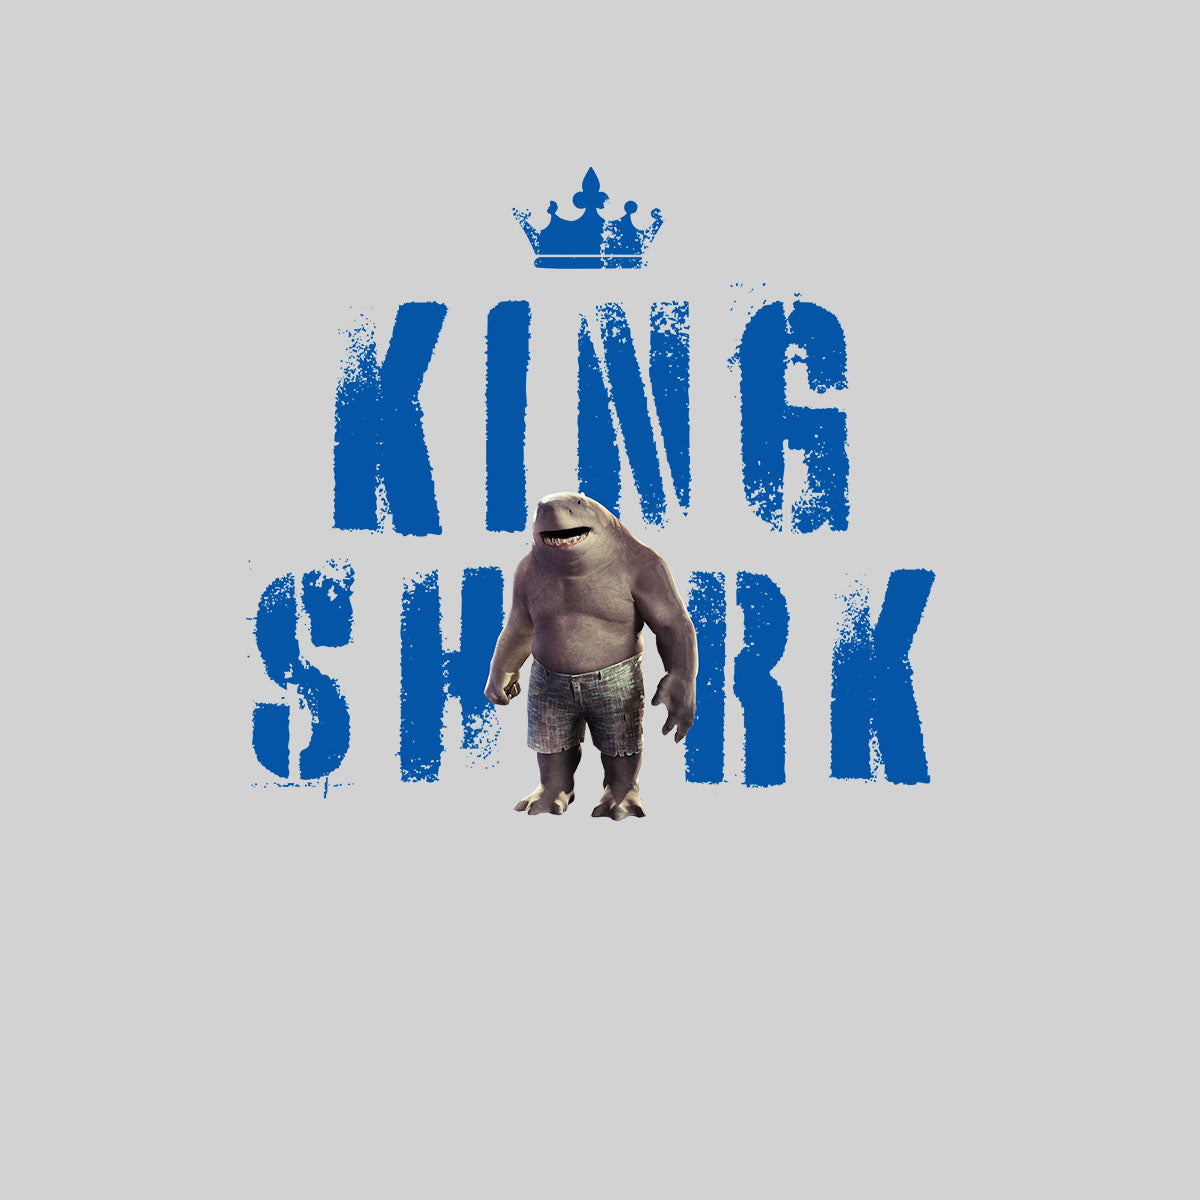 King Shark DC Funny Suicide Squad Typography Movie T-shirt for Kids - Kuzi Tees